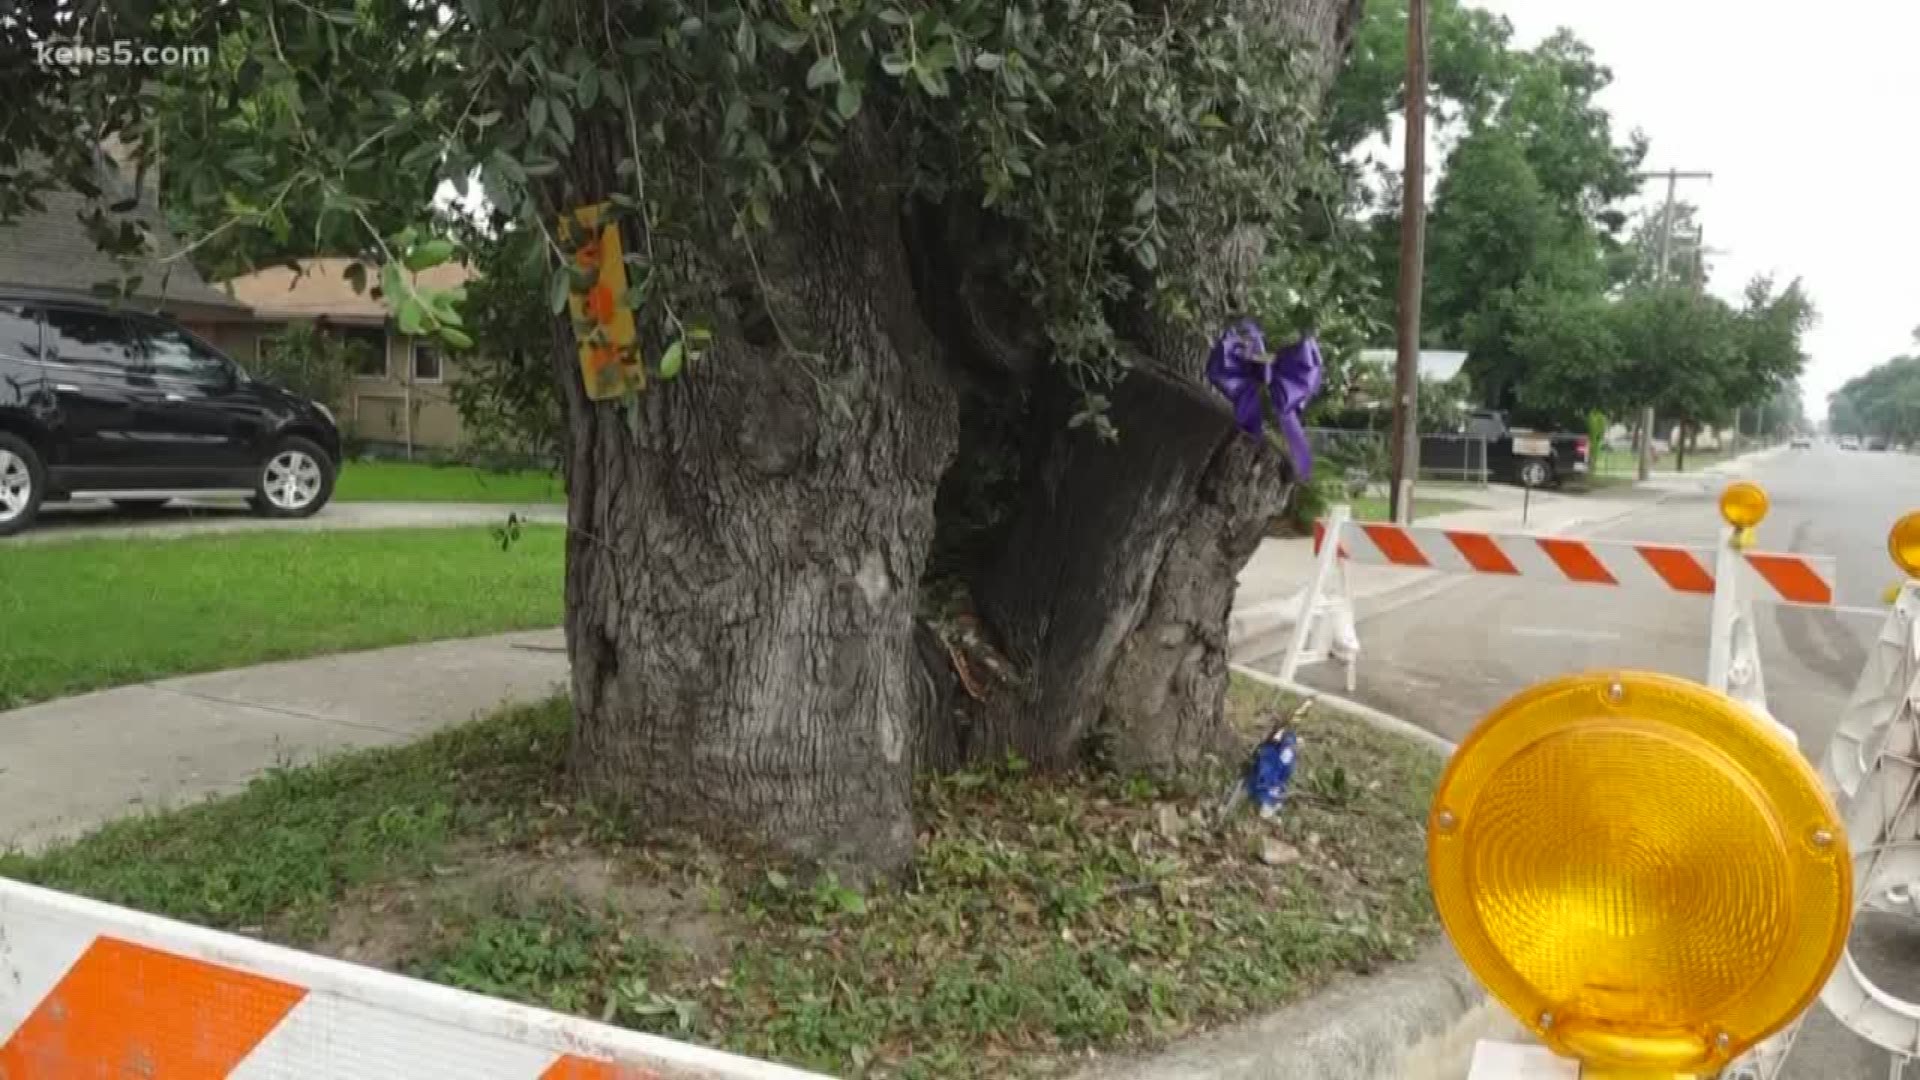 The Uvalde 6-year-old died at the hospital after being struck by a partially-hanging limb on a tree the family alleges shouldn't have been there in the first place.